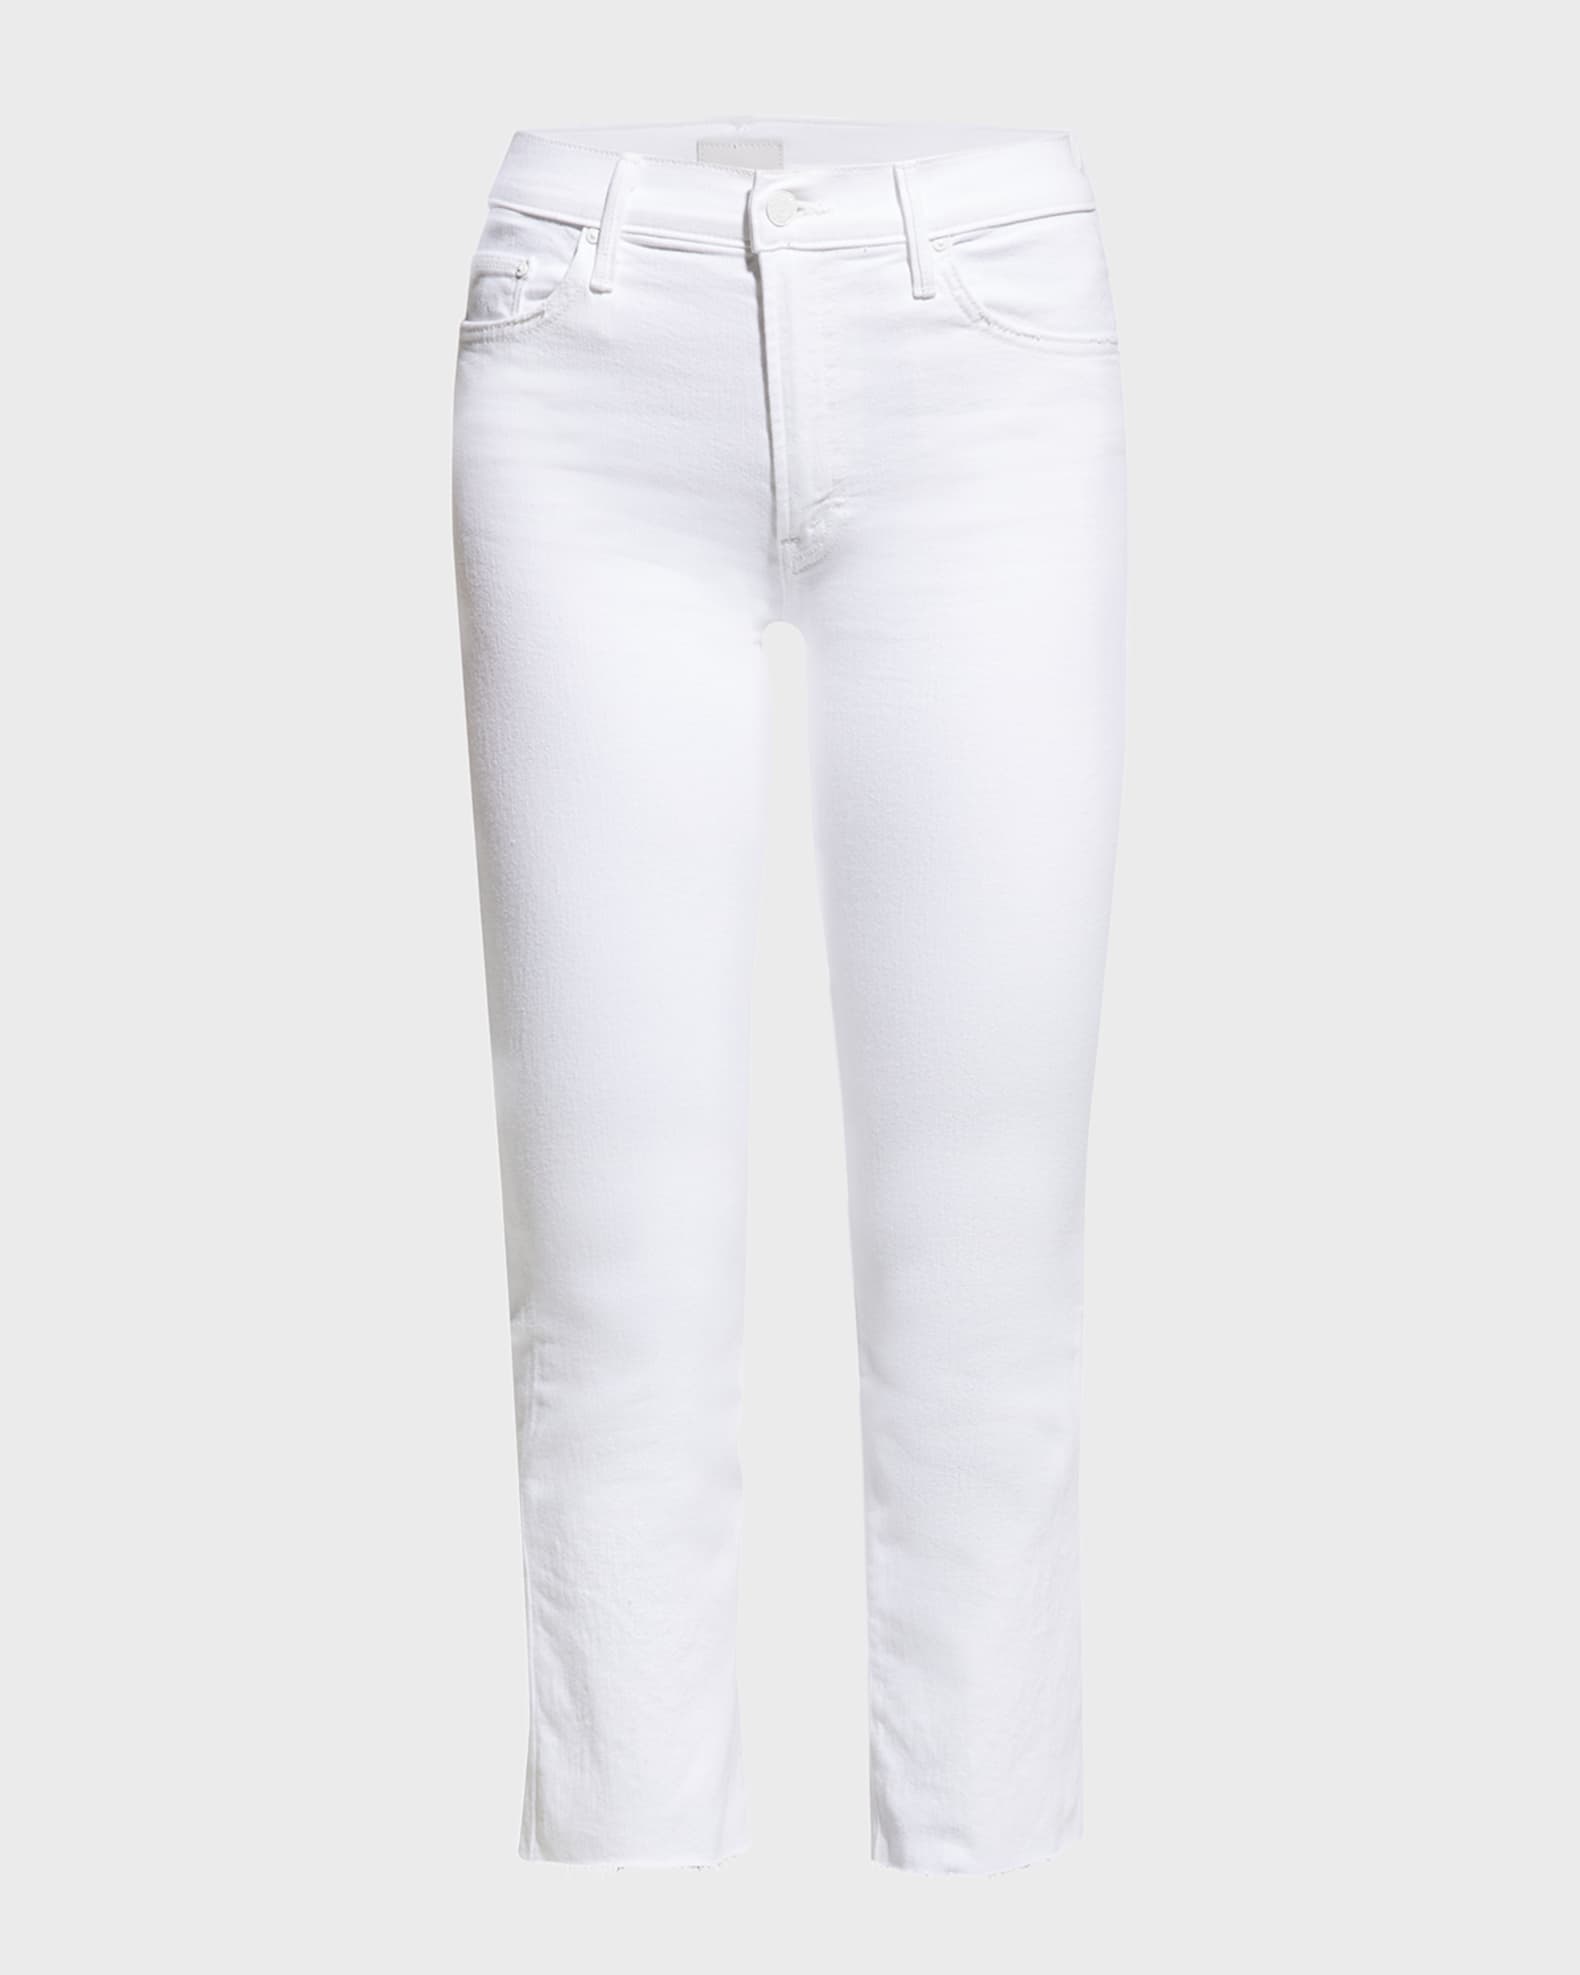 MOTHER The Insider Crop Step Fray Jeans | Neiman Marcus